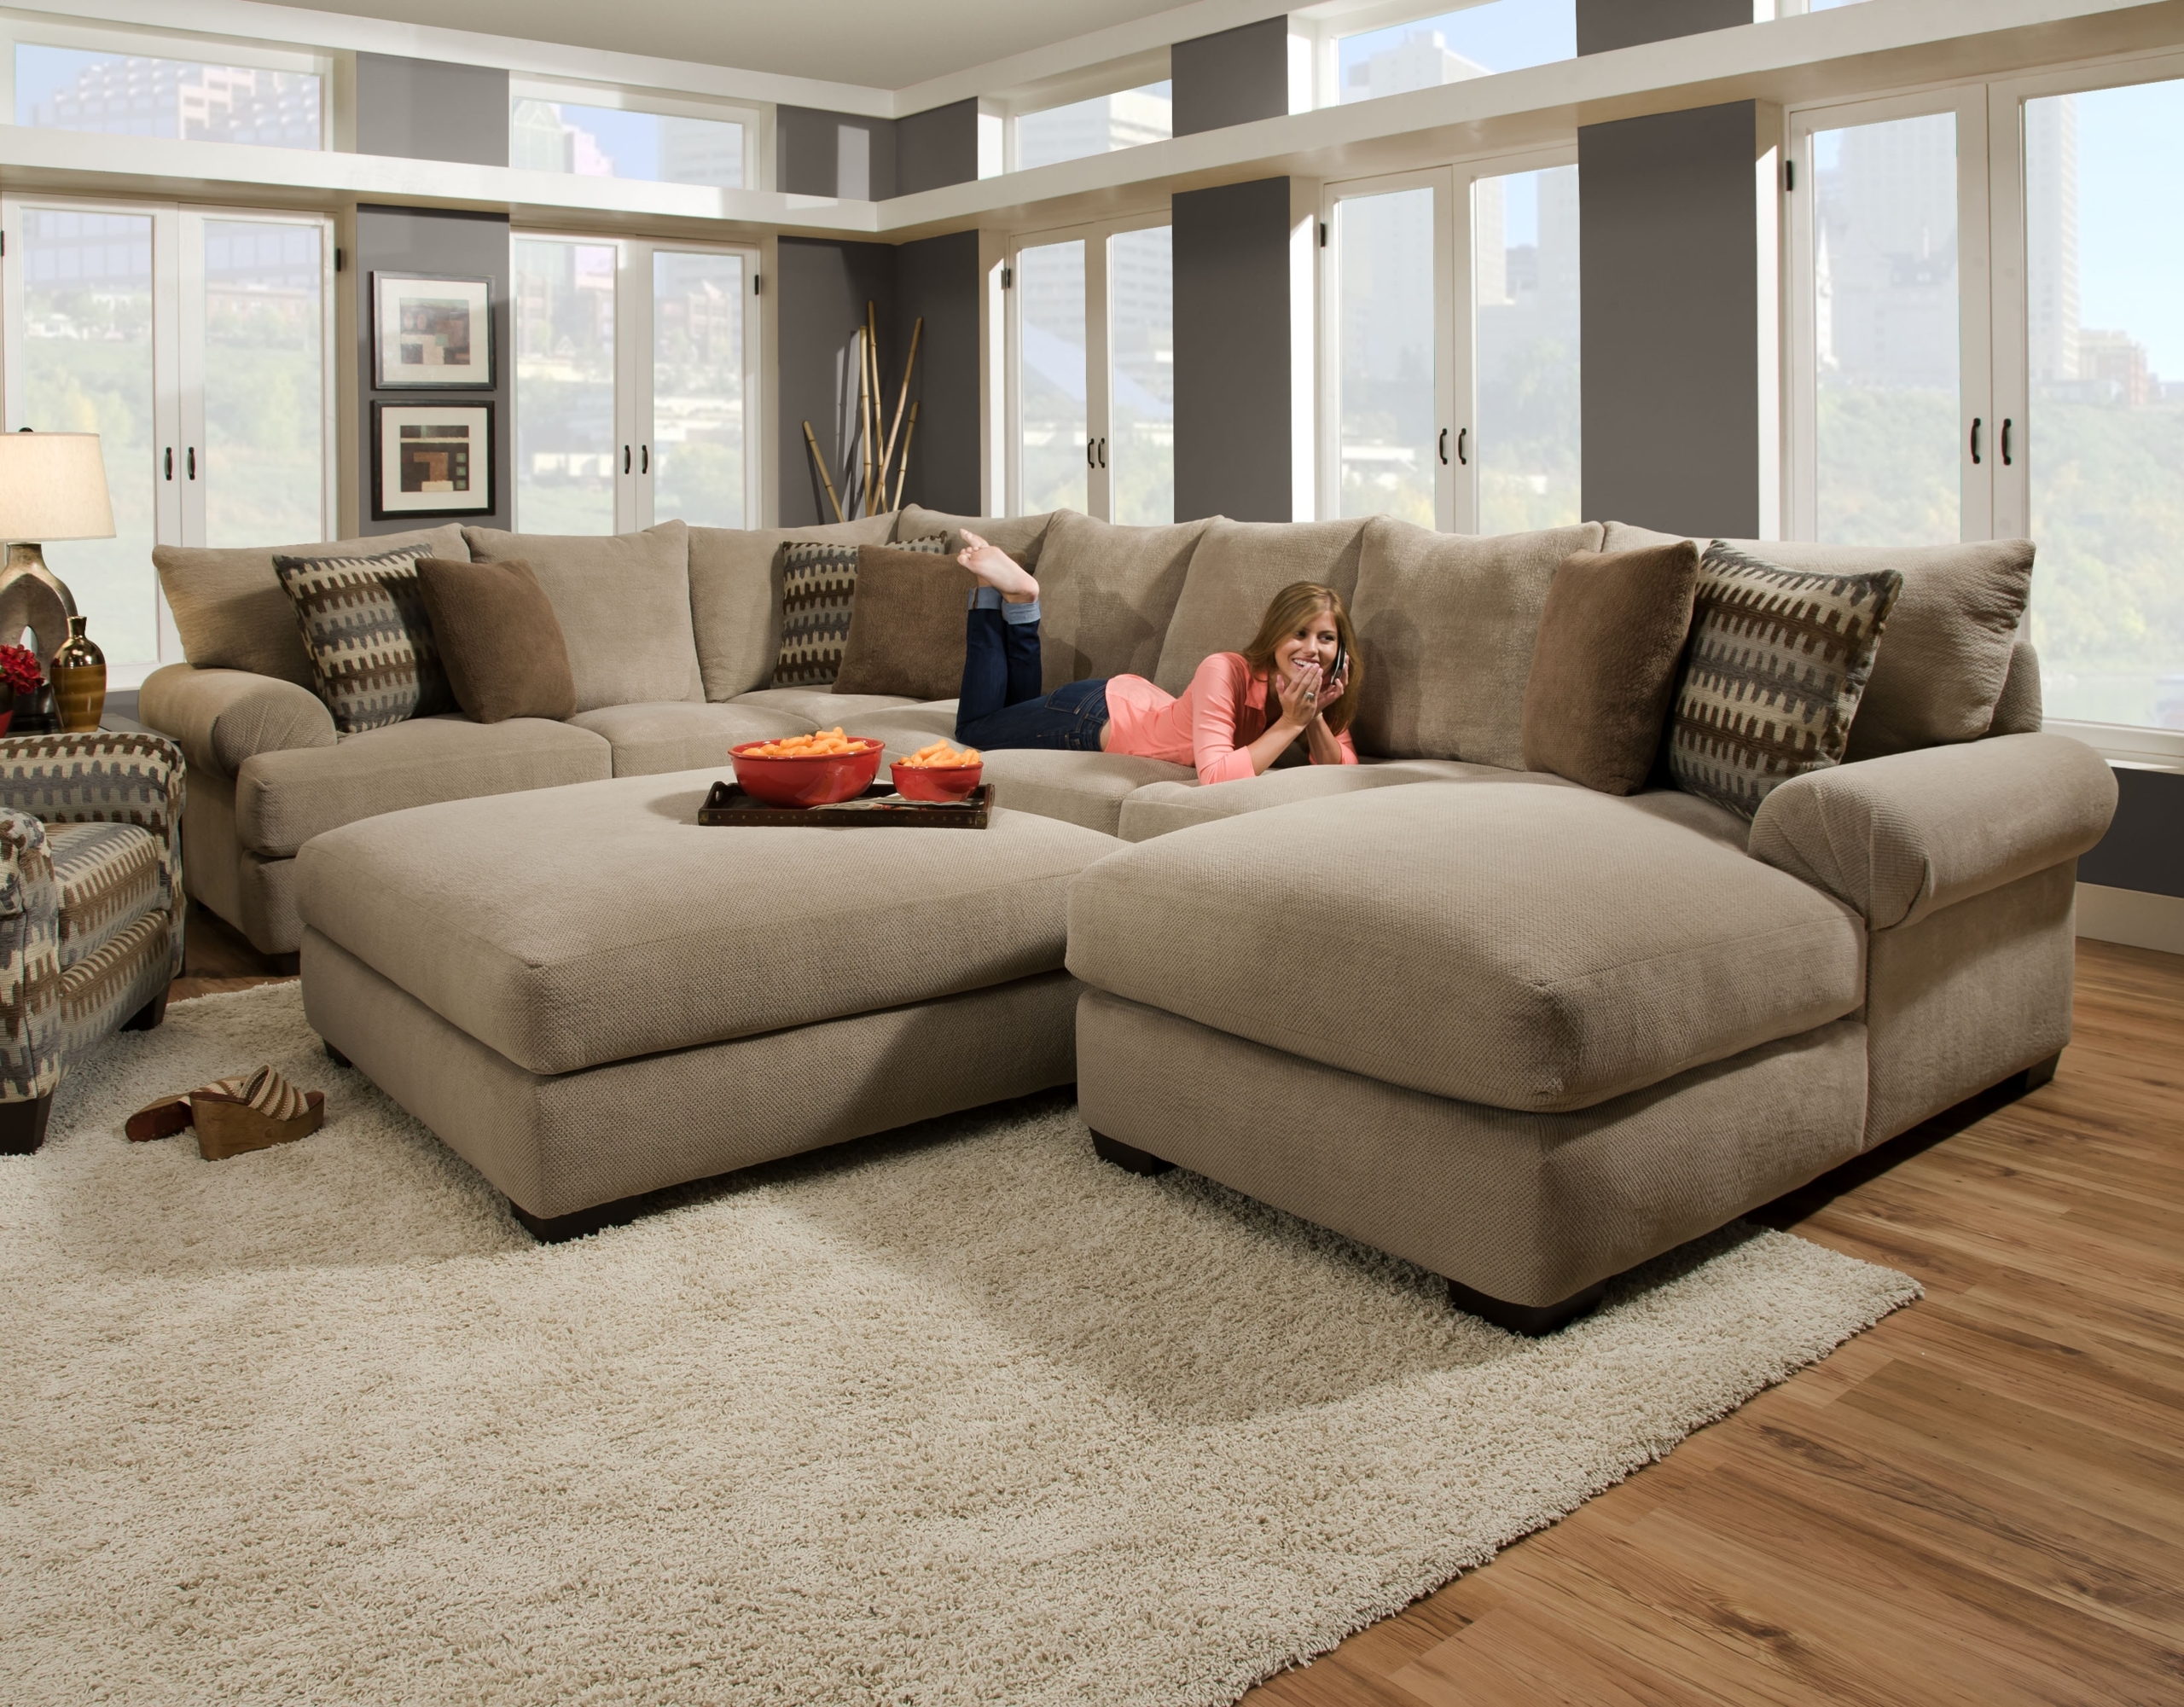 Extra Large Sectional Sofa Visualhunt, Huge Sectionals Sofas